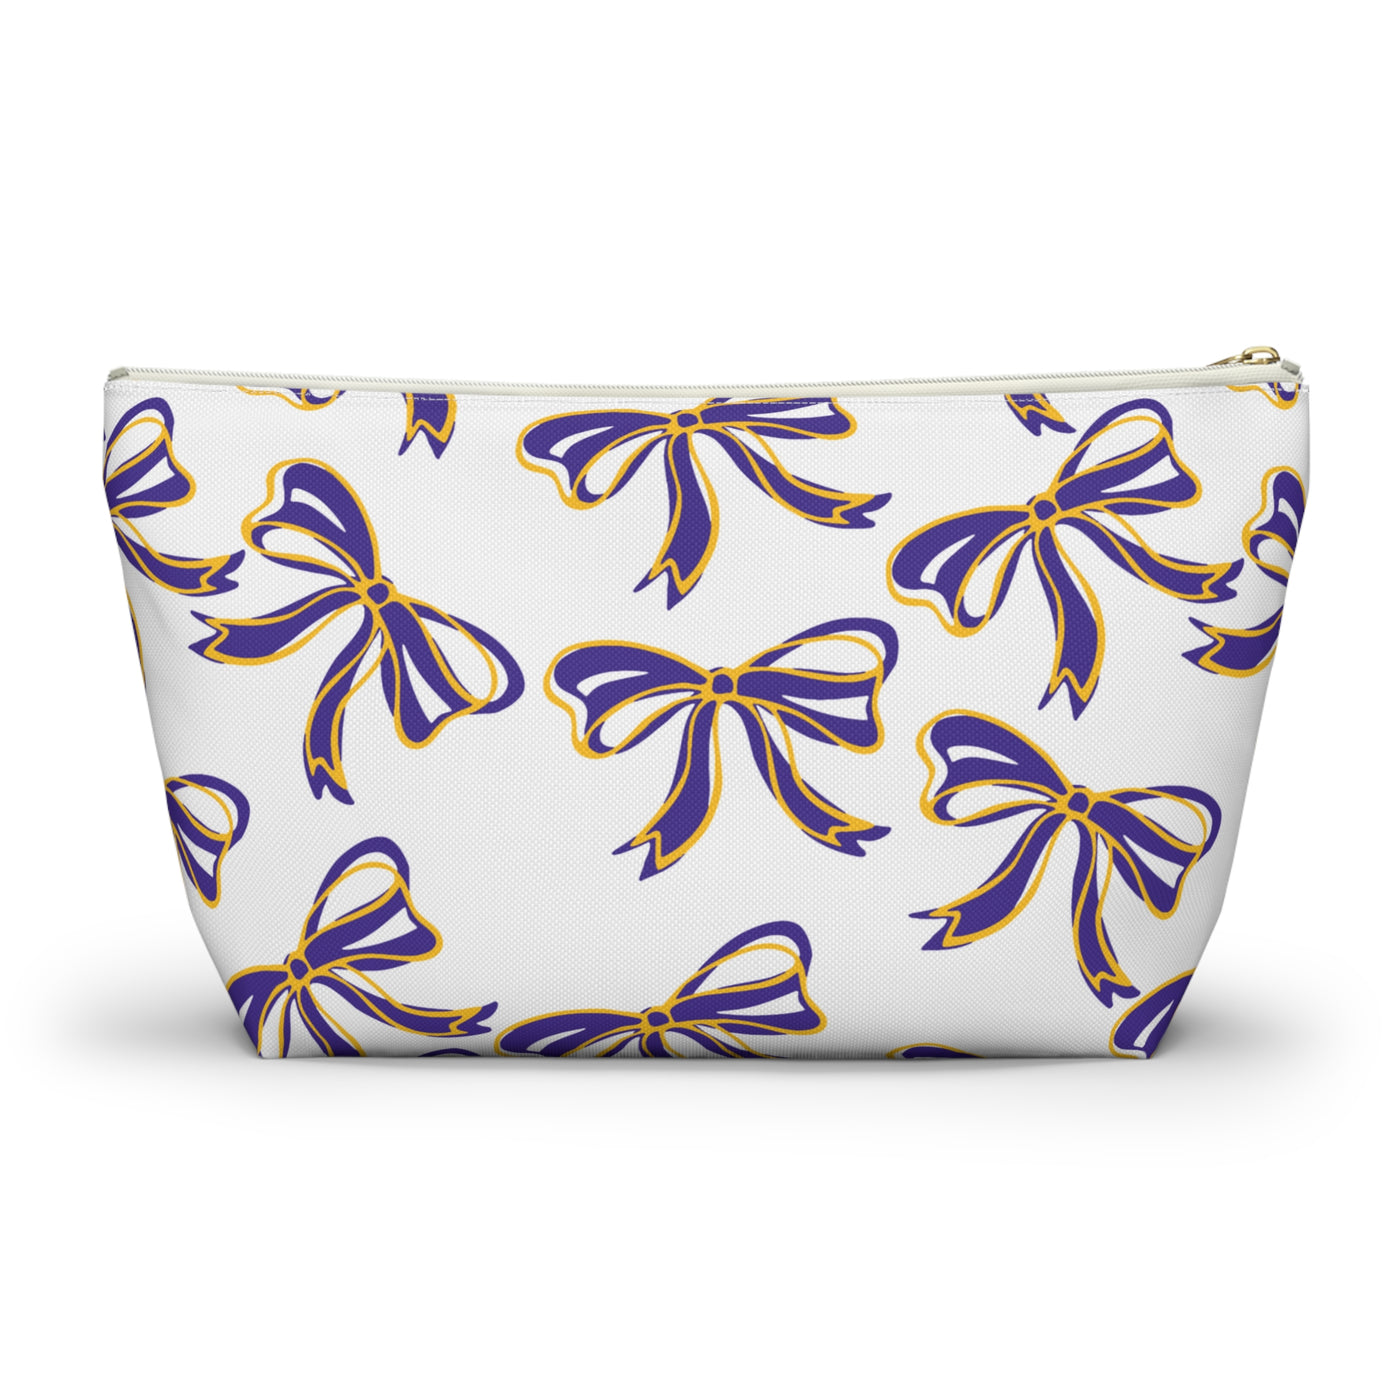 Trendy Bow Makeup Bag - Graduation Gift, Bed Party Gift, Acceptance Gift, College Gift, LSU, LSU Tigers, Purple and Gold